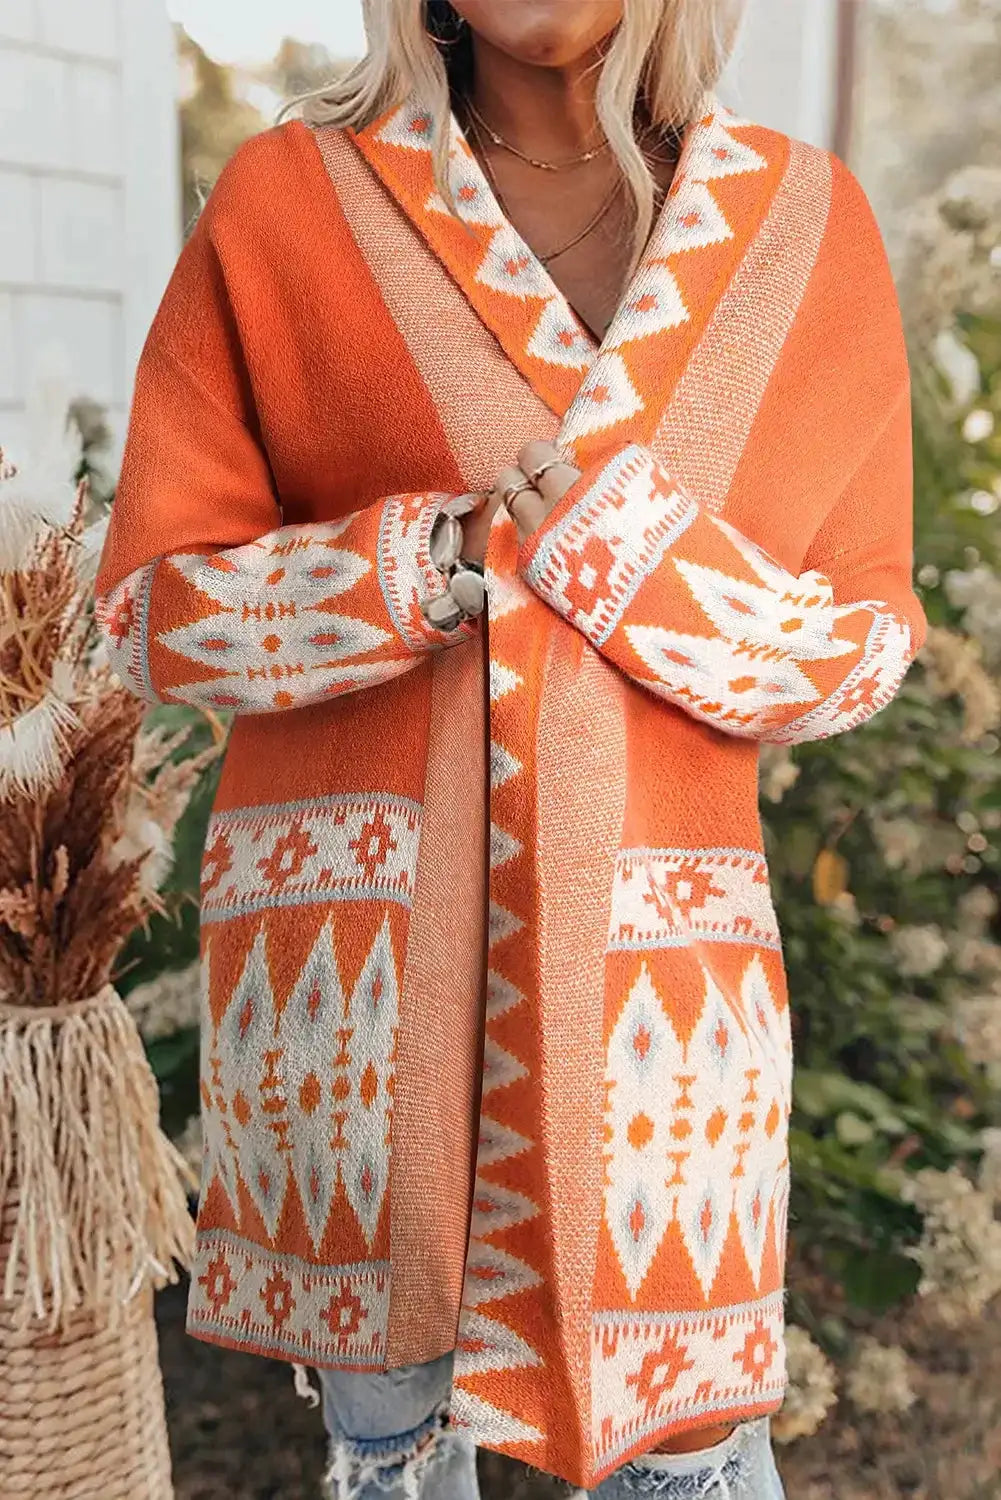 Aztec print open front knitted cardigan - orange printed / l 48% acrylic + 28% nylon + 24% rayon sweaters & cardigans